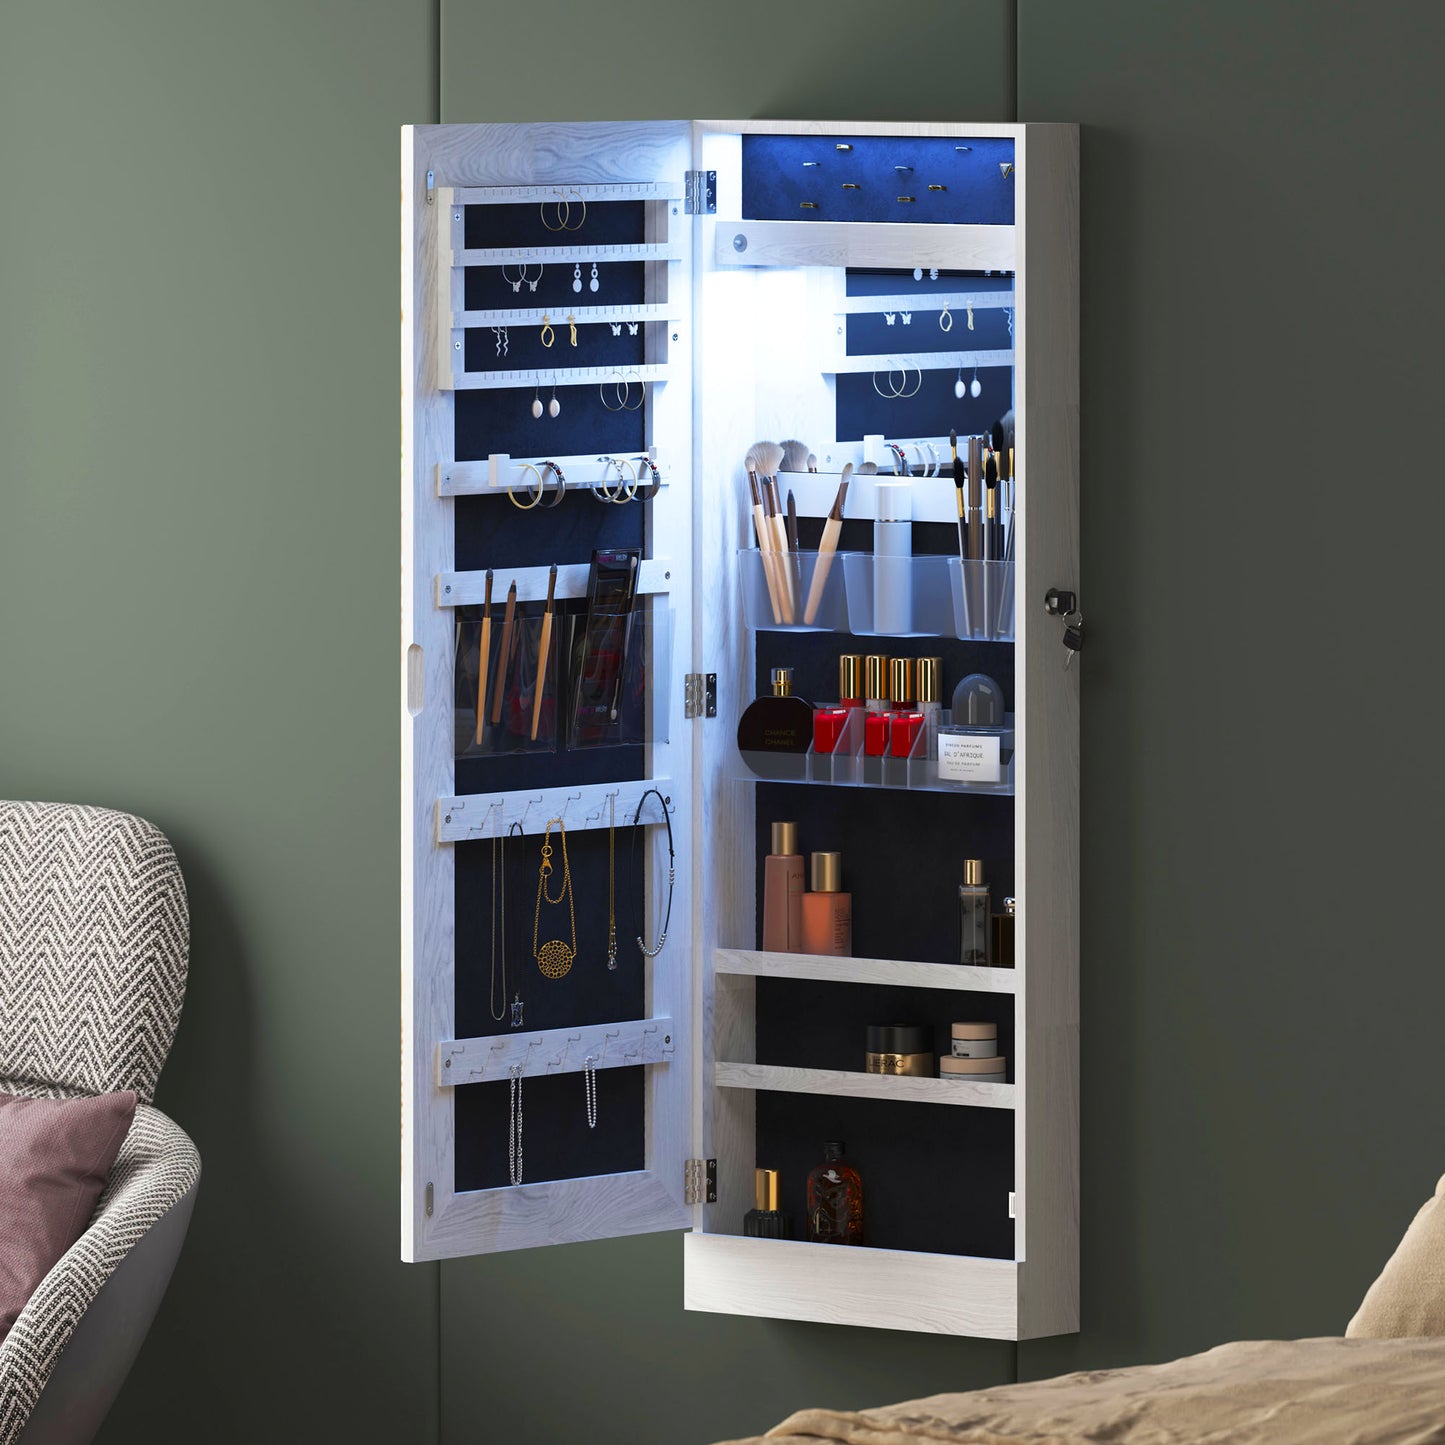 SogesPower 42.5" Wall Mirror Jewelry Cabinet with Adjusttable LED Light- White